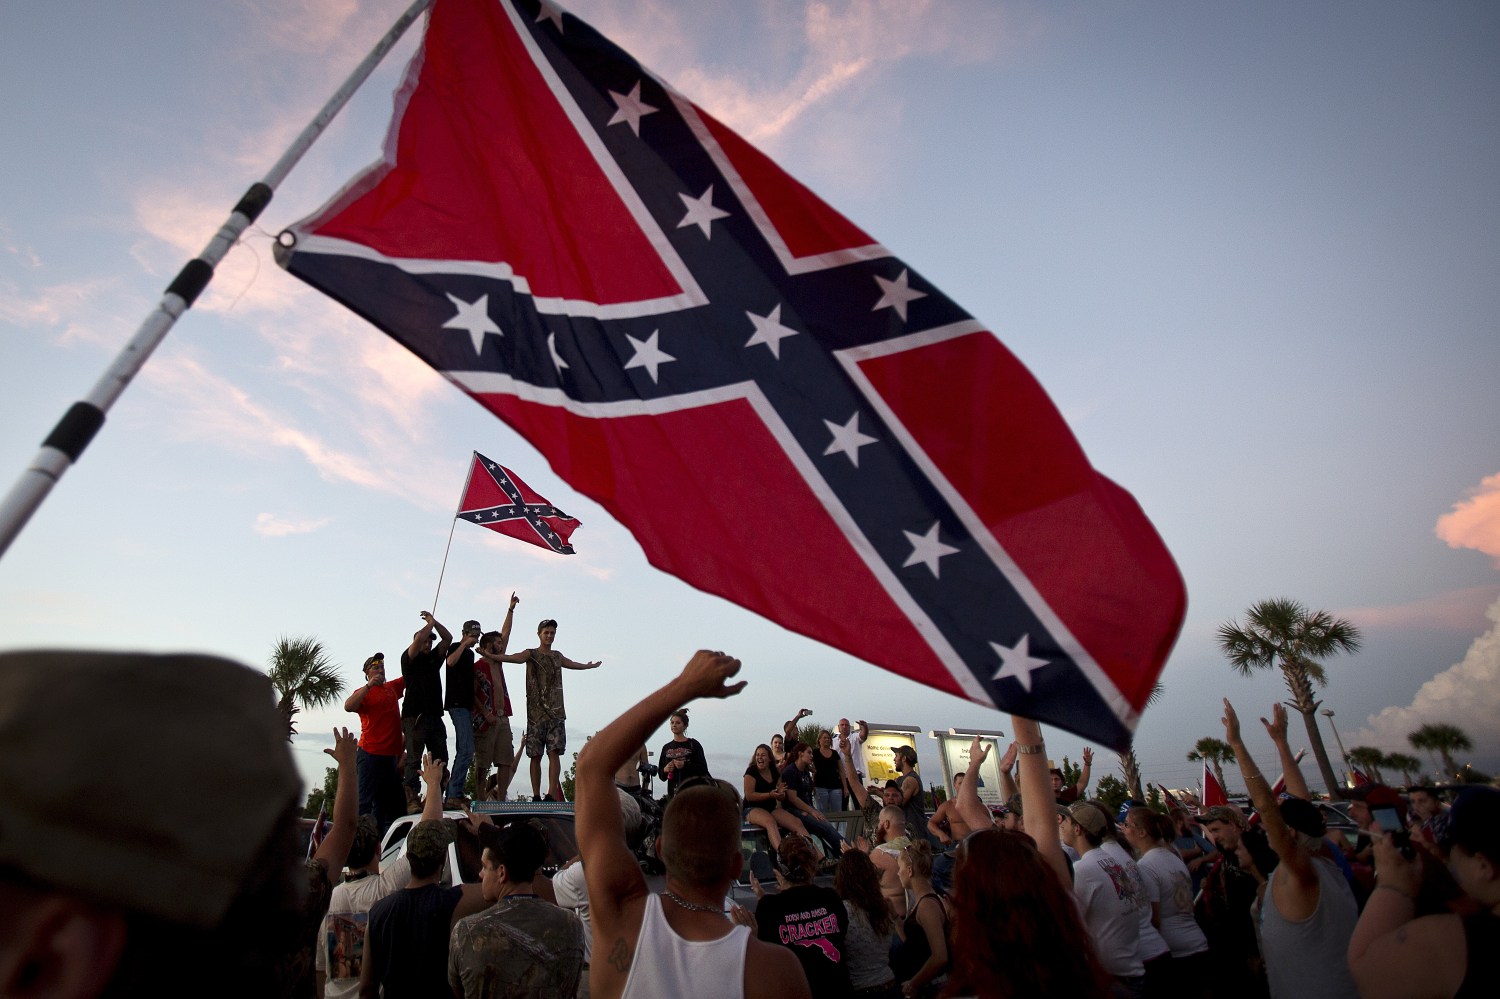 Participants in the "Ride for Pride" event stand on the back of their pickup truck as they speak to an assembled crowd during the impromptu event to show their support the Confederate flag in Brandon, Hillsborough County, June 26, 2015. Several hundred people took part in the event.     REUTERS/Carlo Allegri